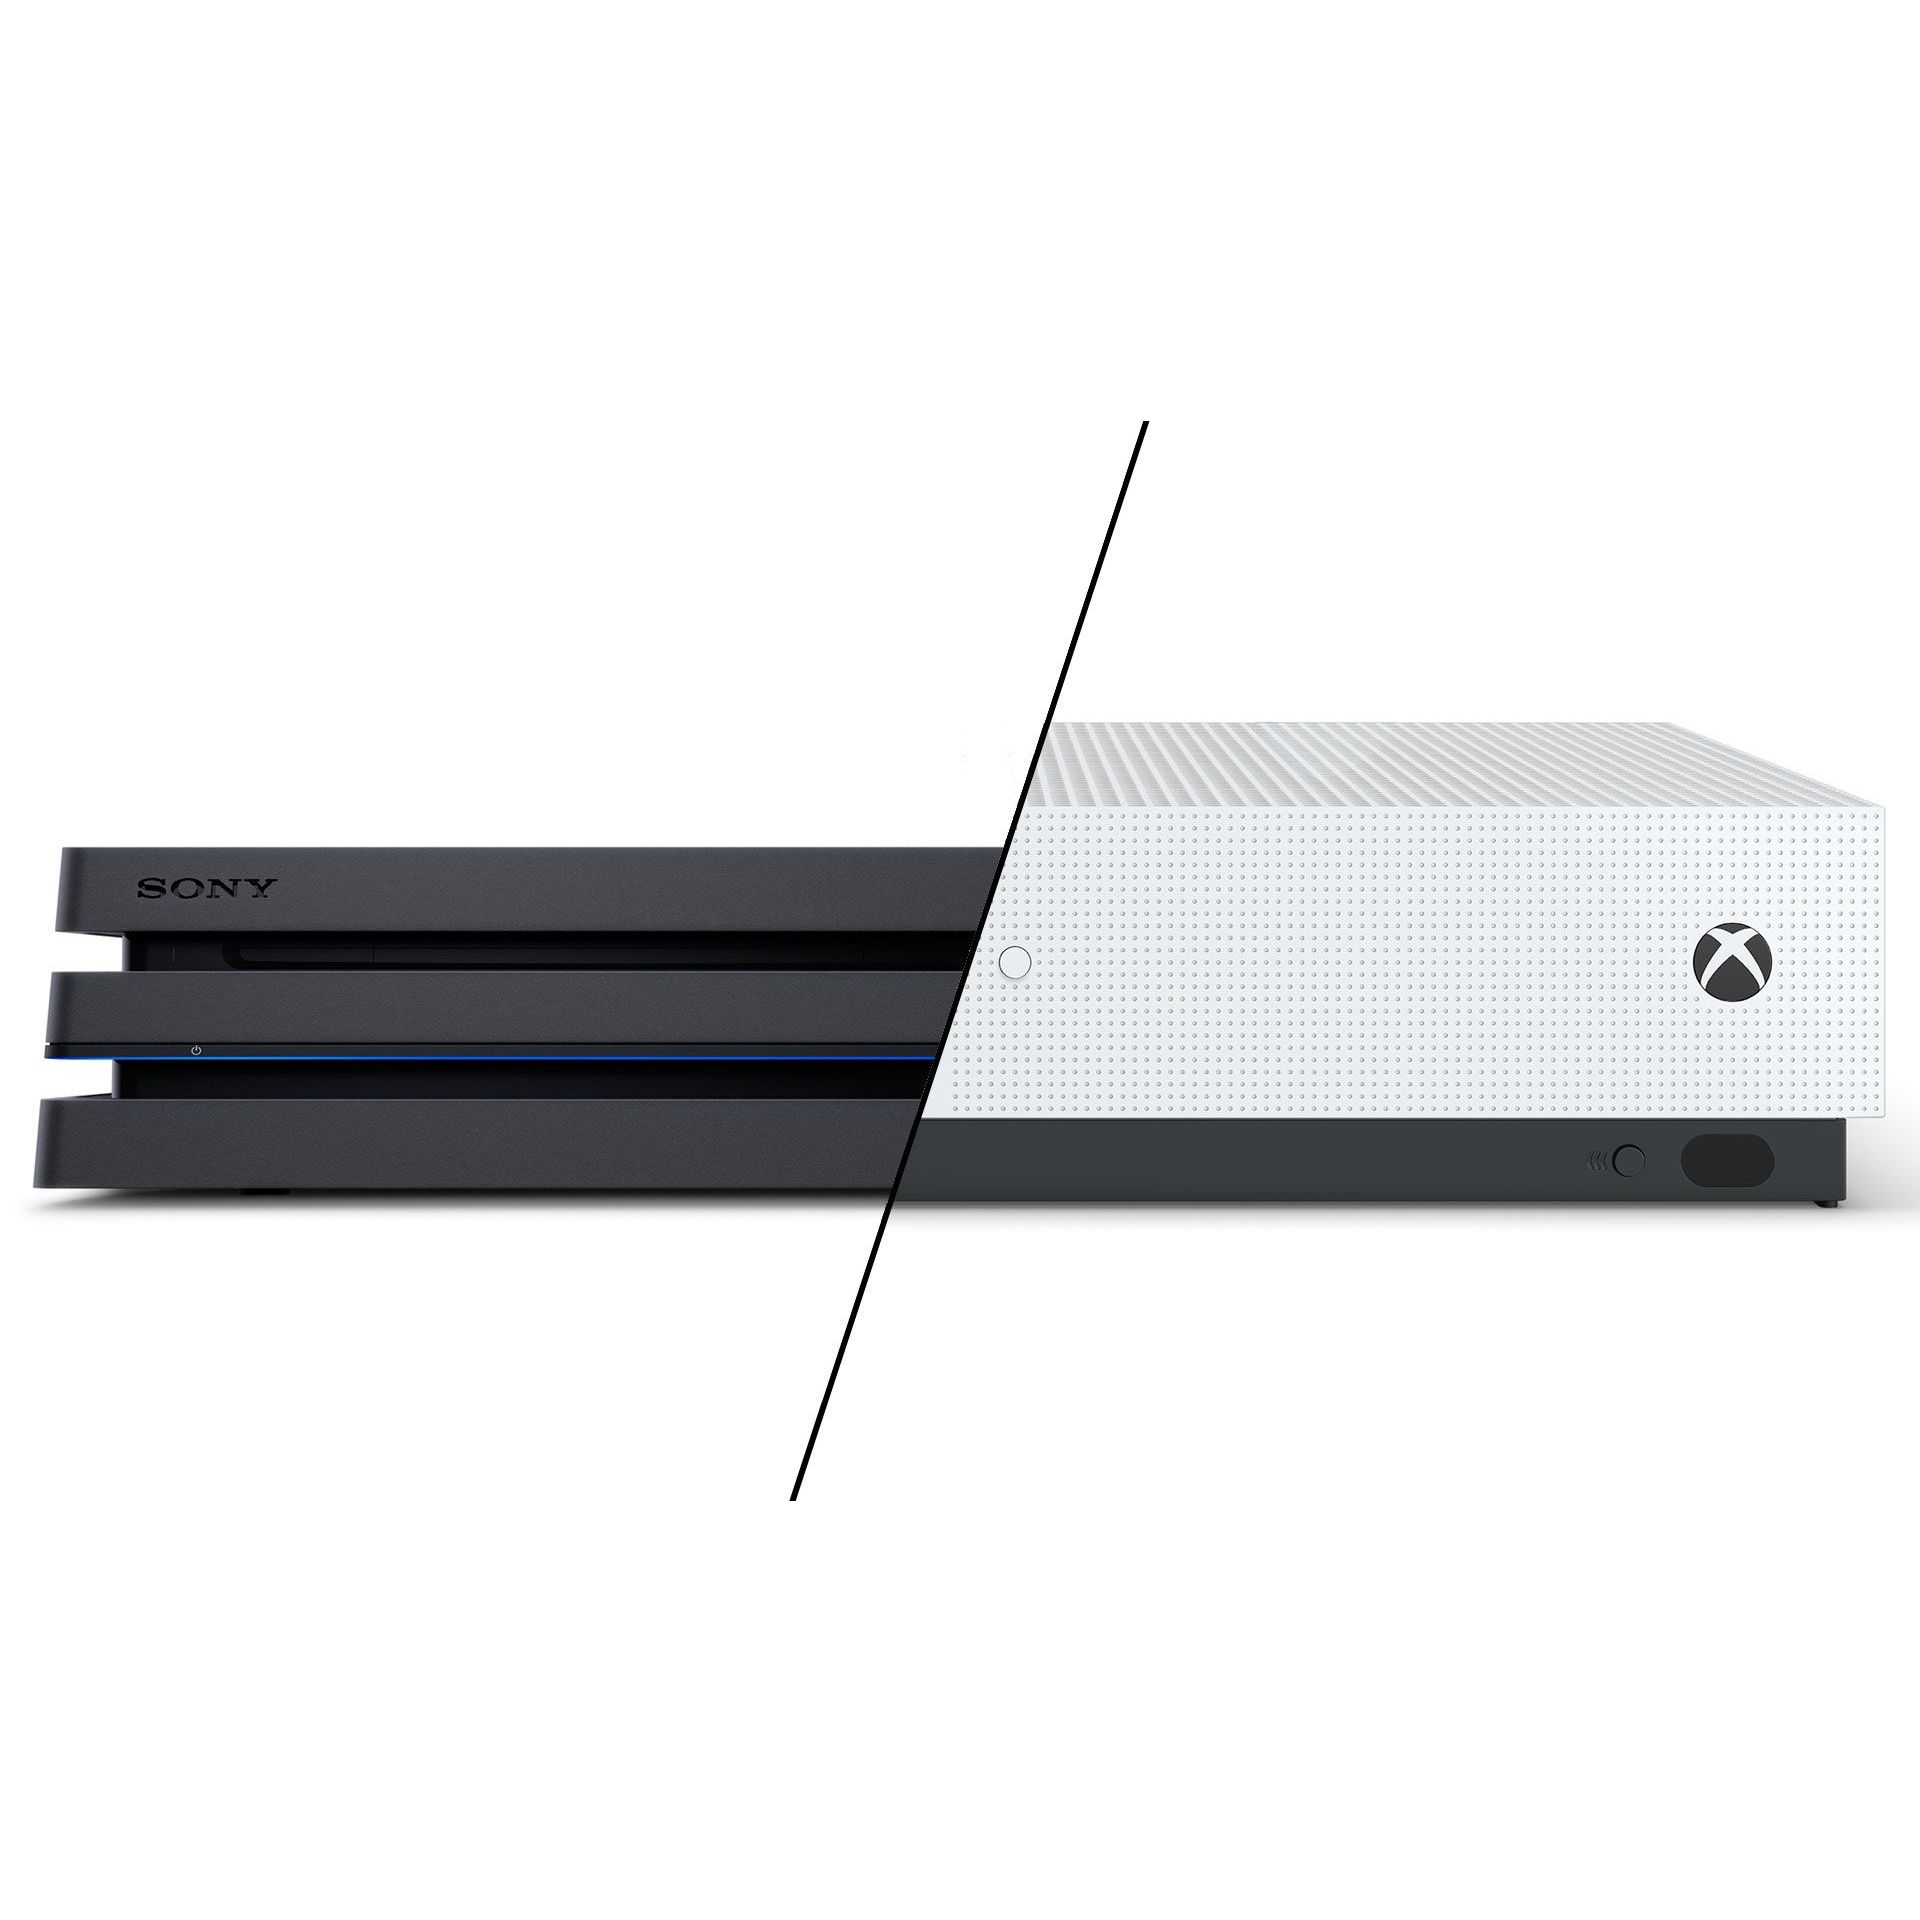 Reusachtig Corrupt voor PS4 Pro vs Xbox One X – Which console should you buy?